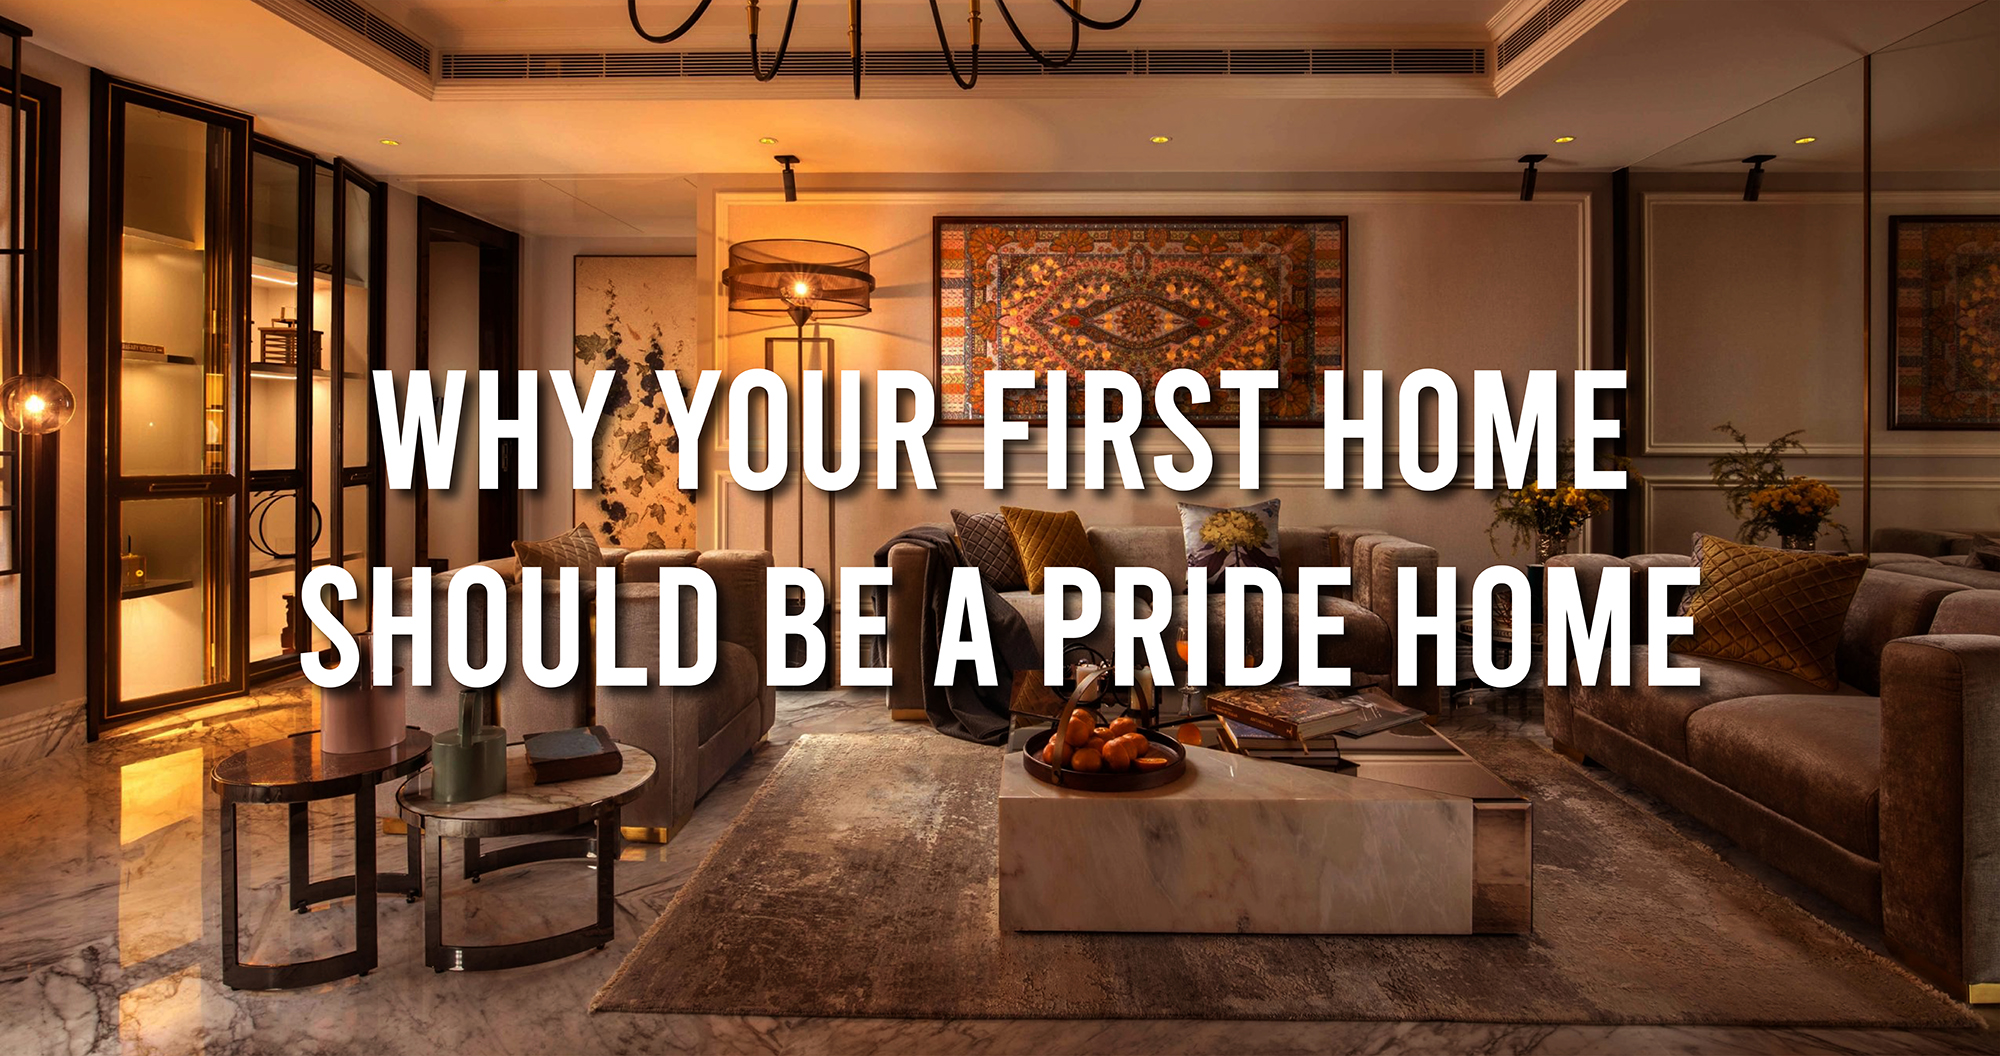 Why Your First Home Should be a Pride Home